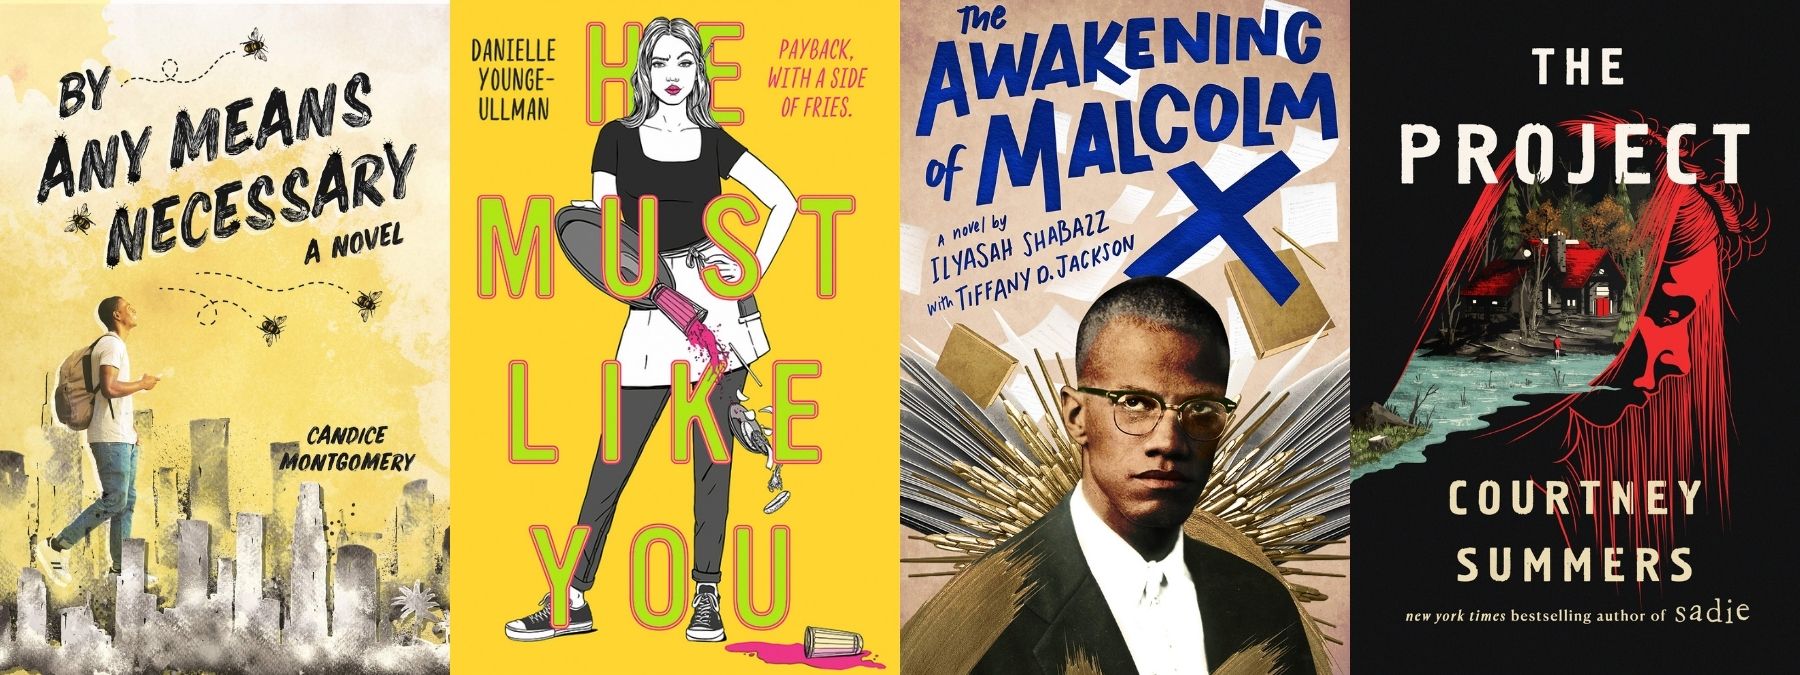 By Any Means Necessary, He Must Like You, The Awakening of Malcolm X, and The Project covers